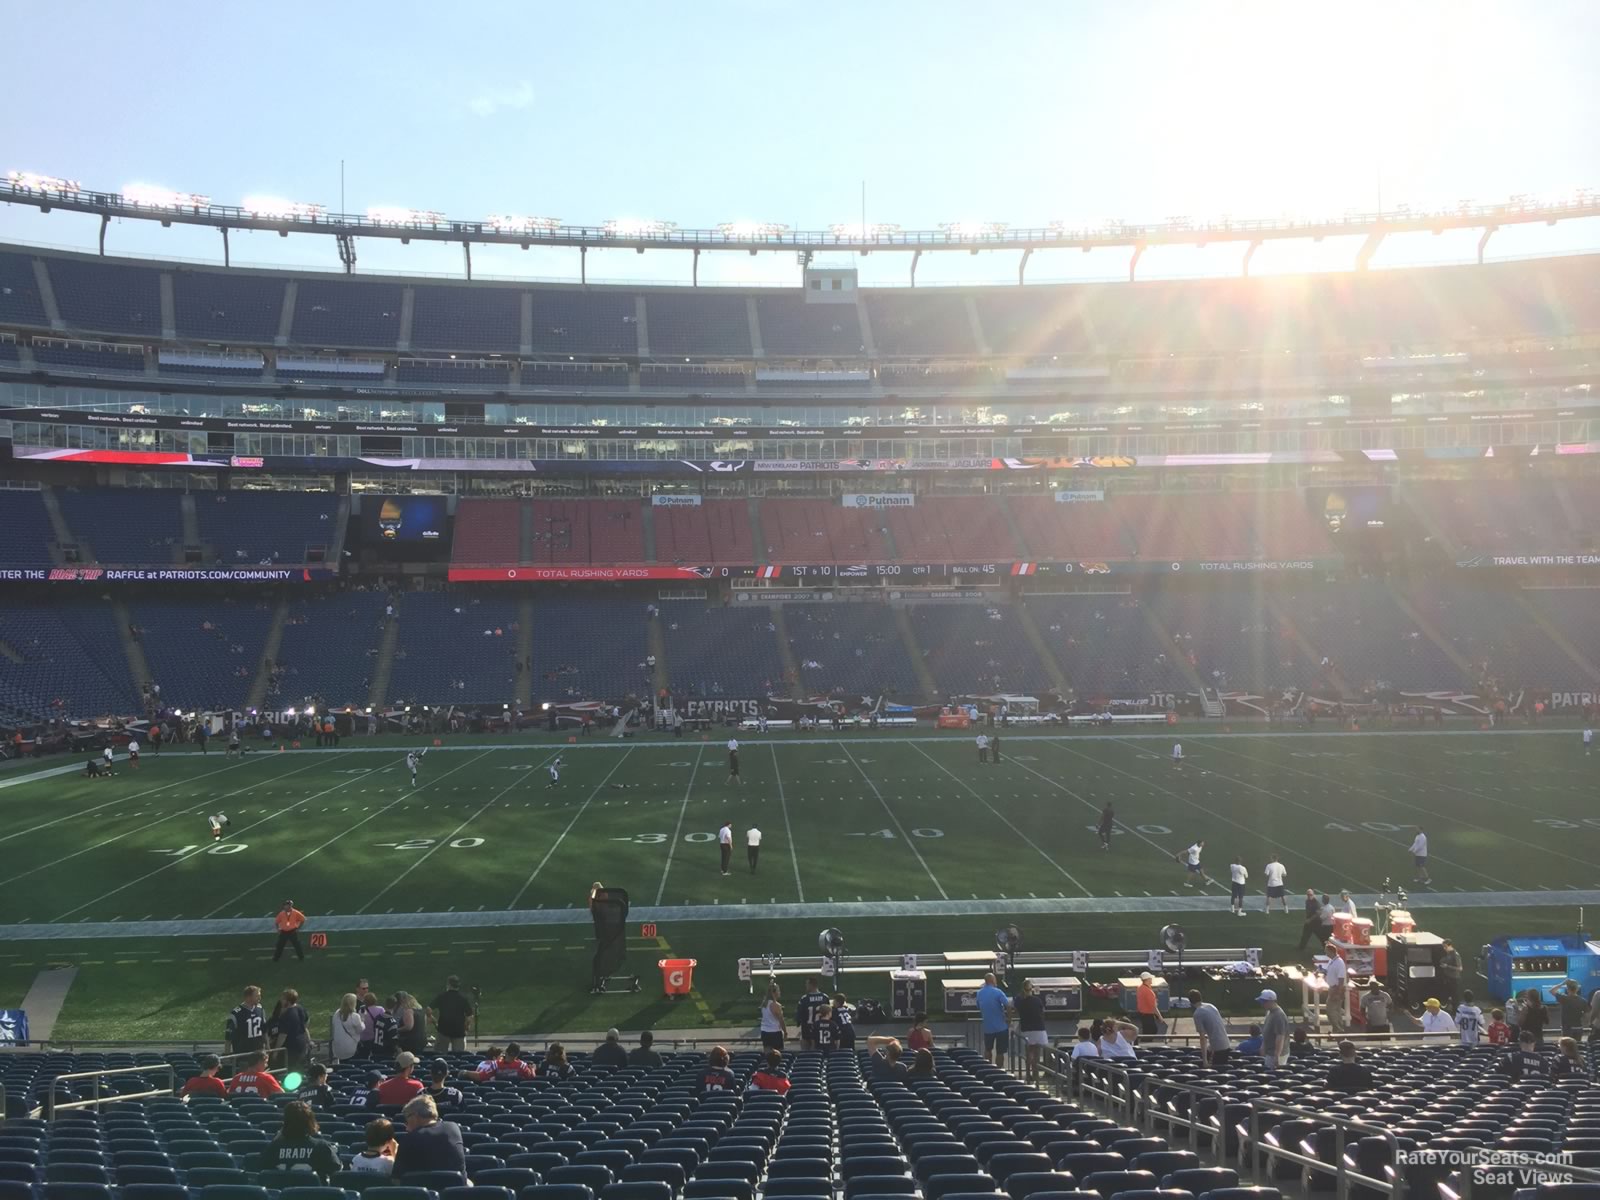 section 111, row 29 seat view  for football - gillette stadium